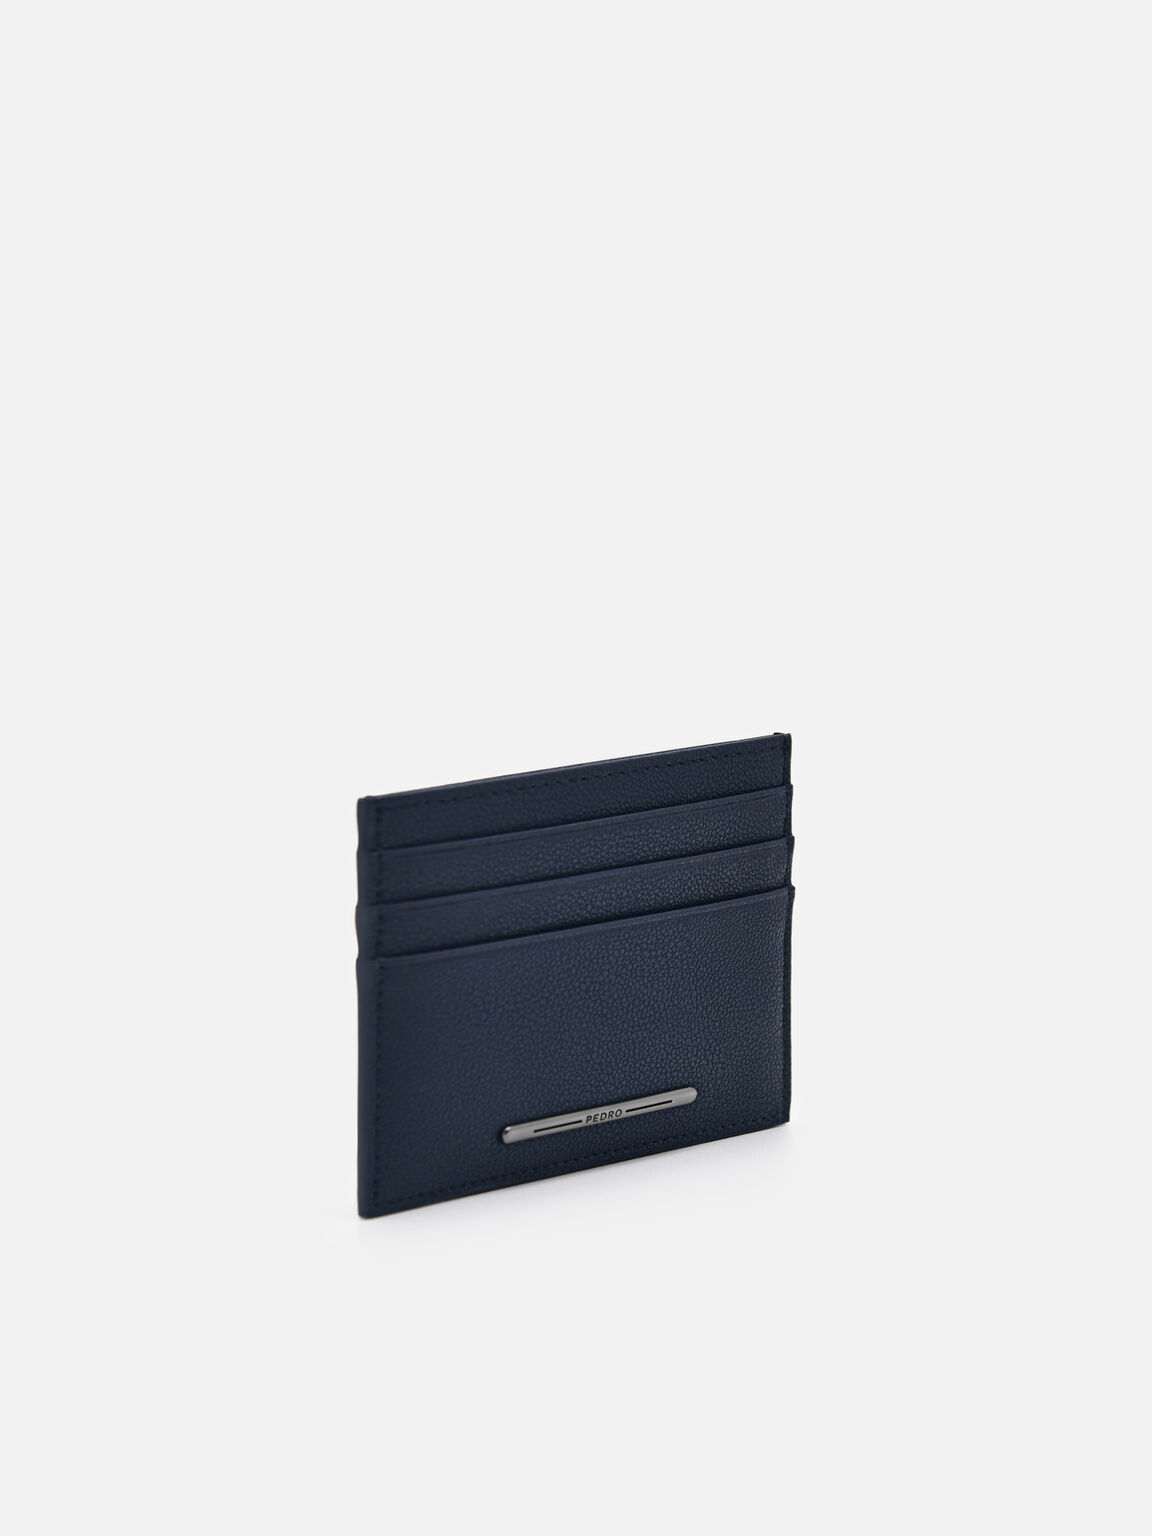 Embossed Leather Card Holder, Navy